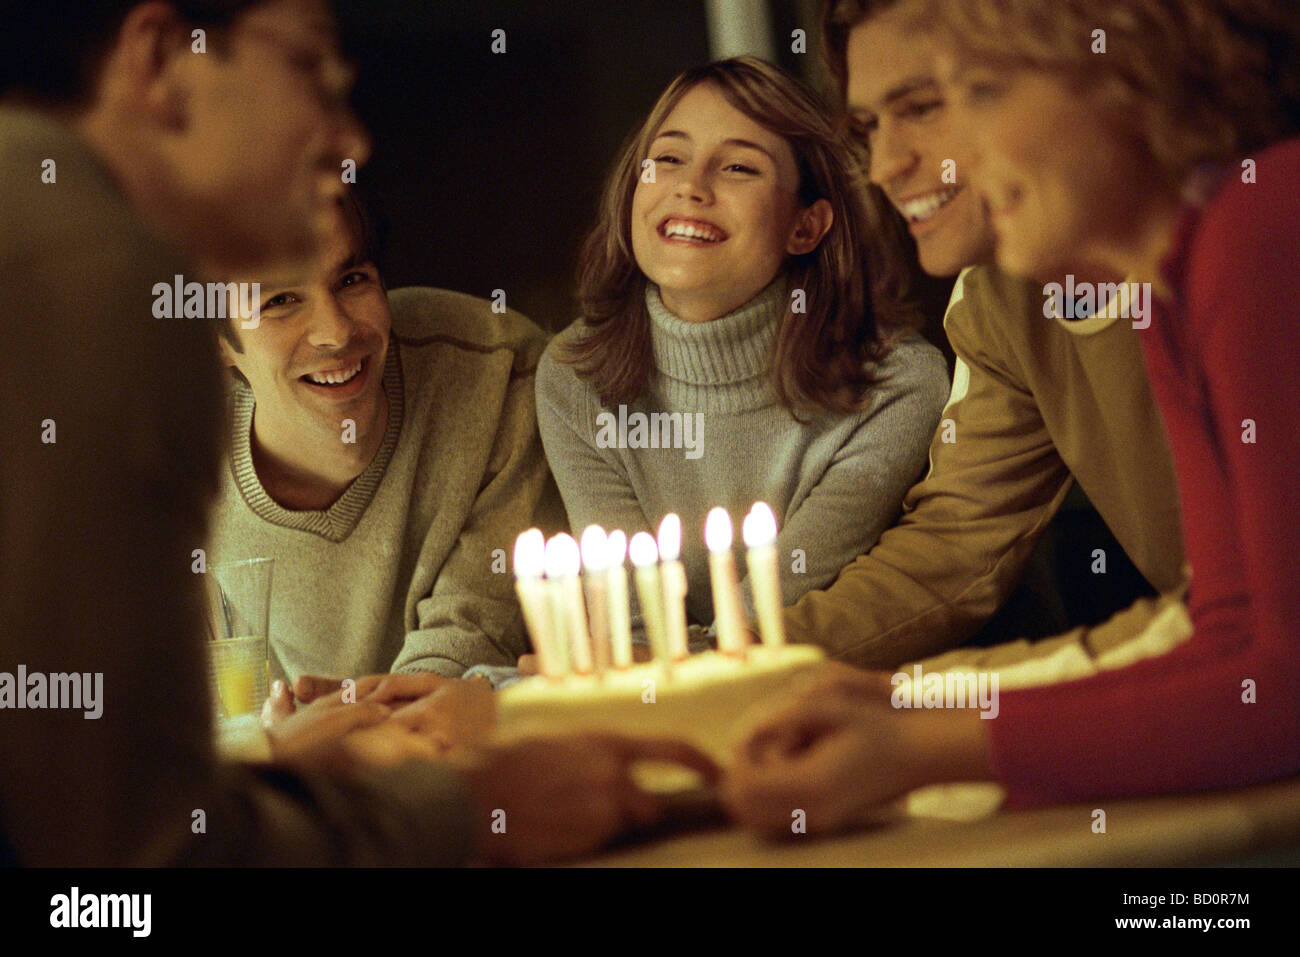 Friends gathered together presenting birthday cake to friend Stock Photo